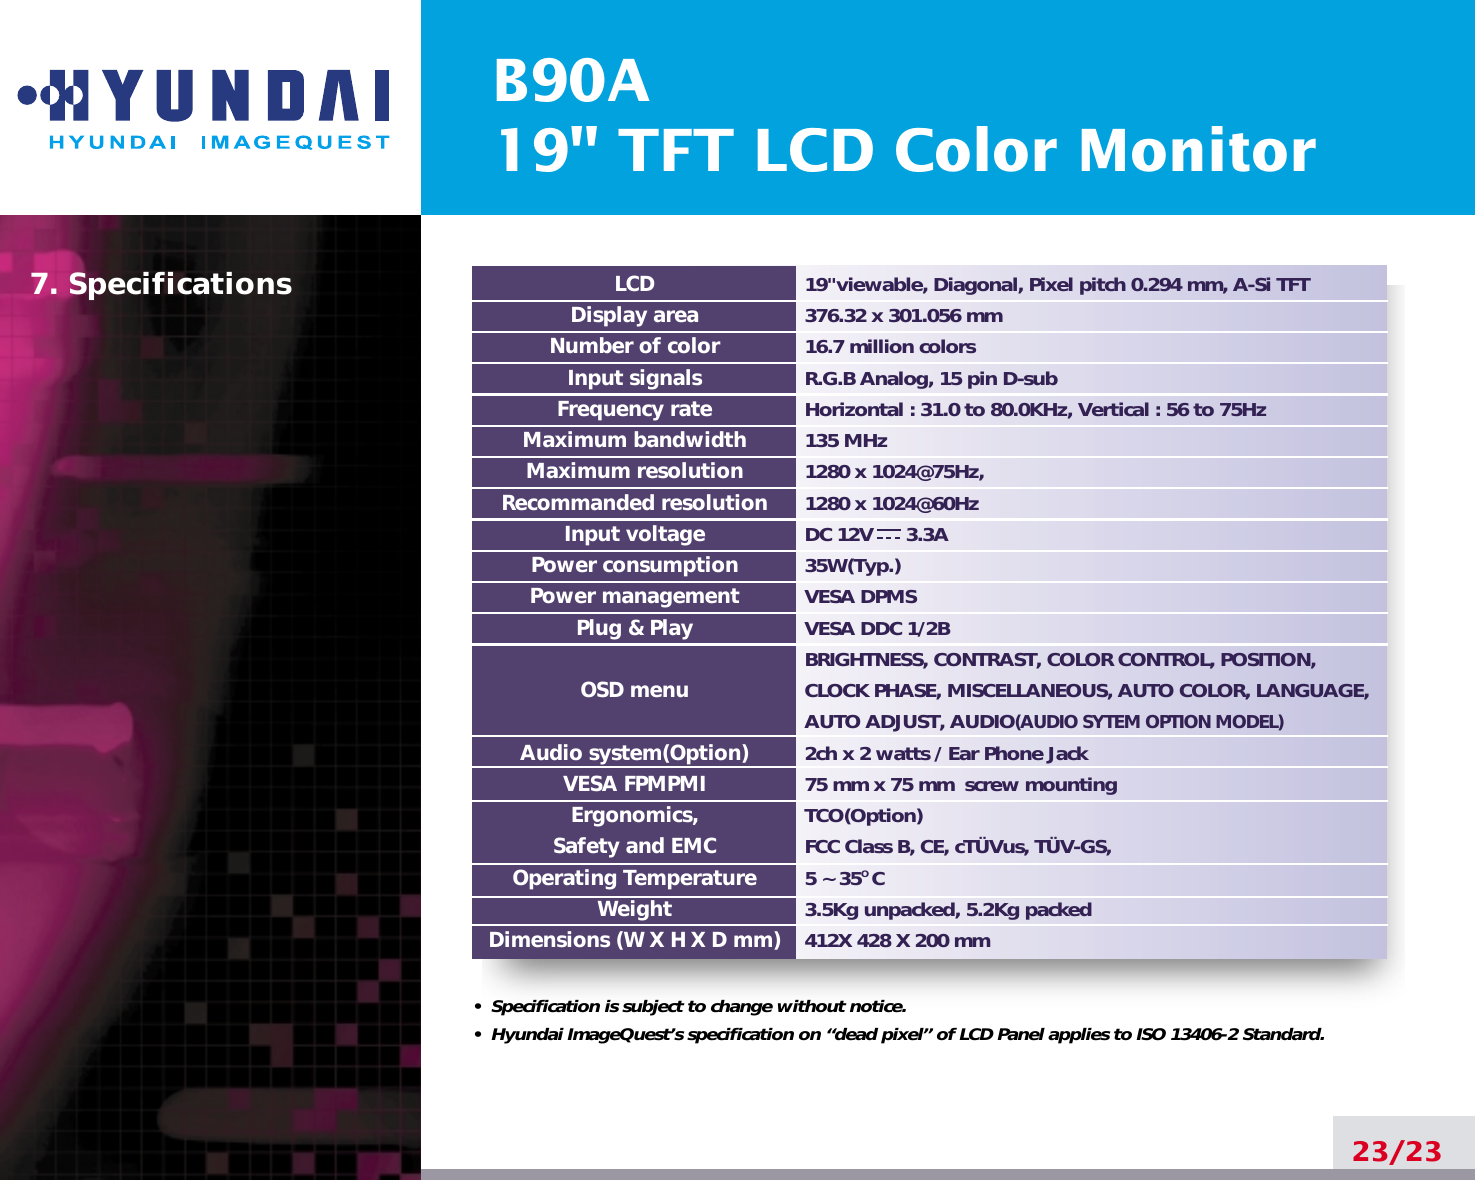 B90A19&quot; TFT LCD Color Monitor23/23LCDDisplay areaNumber of colorInput signalsFrequency rateMaximum bandwidthMaximum resolutionRecommanded resolutionInput voltagePower consumptionPower managementPlug &amp; PlayOSD menuAudio system(Option)VESA FPMPMIErgonomics,Safety and EMCOperating TemperatureWeightDimensions (W X H X D mm)•  Specification is subject to change without notice.•  Hyundai ImageQuest’s specification on “dead pixel” of LCD Panel applies to ISO 13406-2 Standard.7. Specifications19&quot;viewable, Diagonal, Pixel pitch 0.294 mm, A-Si TFT376.32 x 301.056 mm16.7 million colorsR.G.B Analog, 15 pin D-subHorizontal : 31.0 to 80.0KHz, Vertical : 56 to 75Hz135 MHz1280 x 1024@75Hz, 1280 x 1024@60HzDC 12V      3.3A 35W(Typ.)VESA DPMSVESA DDC 1/2BBRIGHTNESS, CONTRAST, COLOR CONTROL, POSITION, CLOCK PHASE, MISCELLANEOUS, AUTO COLOR, LANGUAGE,AUTO ADJUST, AUDIO(AUDIO SYTEM OPTION MODEL)2ch x 2 watts / Ear Phone Jack75 mm x 75 mm  screw mountingTCO(Option) FCC Class B, CE, cTÜVus, TÜV-GS, 5 ~ 35O C3.5Kg unpacked, 5.2Kg packed412X 428 X 200 mm